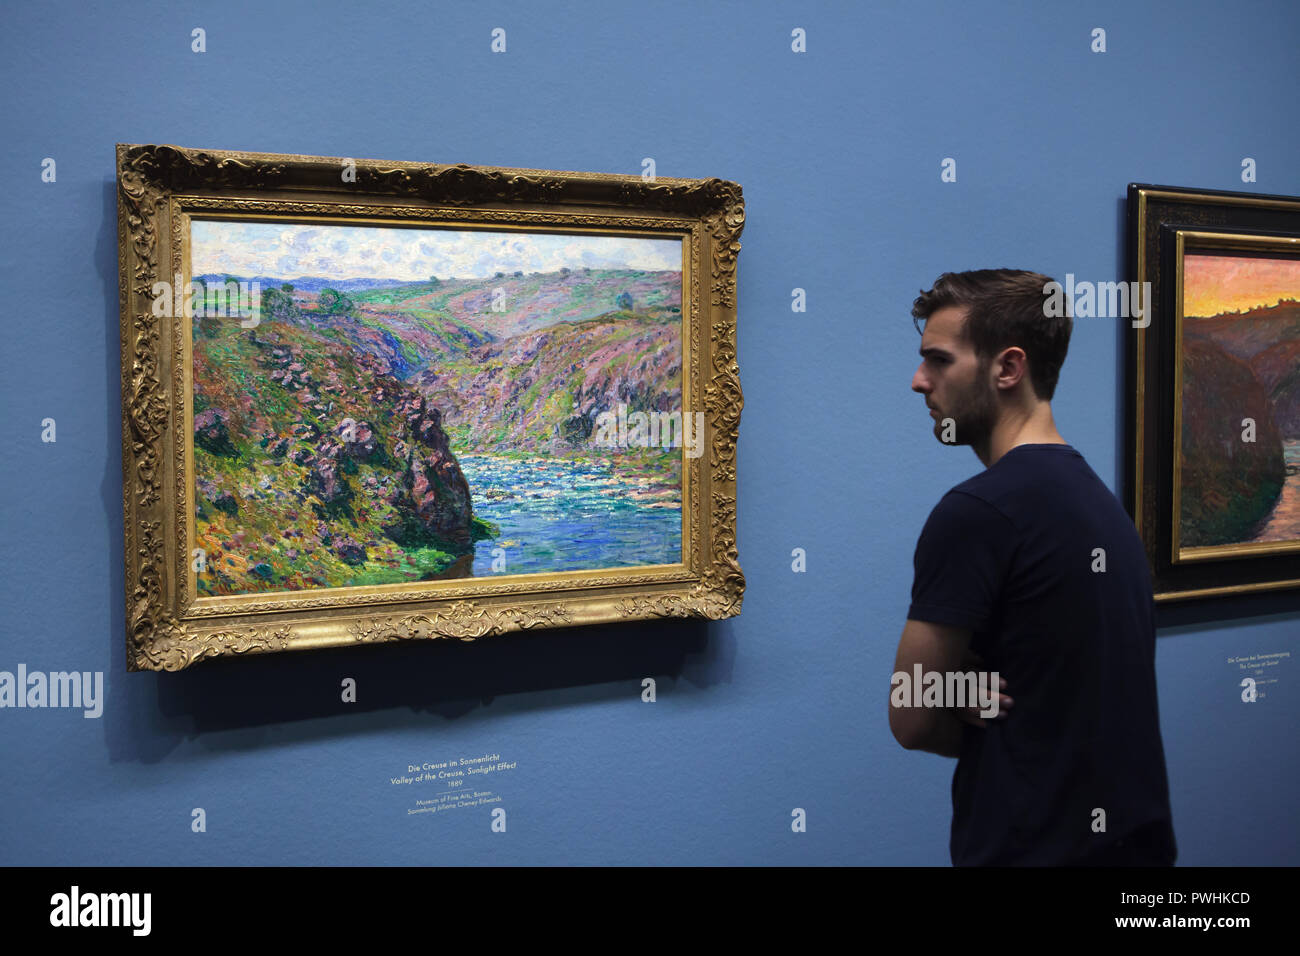 Visitor in front of the painting 'Valley of the Creuse, Sunlight Effect' (1889) by French Impressionist painter Claude Monet displayed at his retrospective exhibition in the Albertina Museum in Vienna, Austria. The exhibition devoted to the founder of French Impressionist painting runs till 6 January 2019. Stock Photo